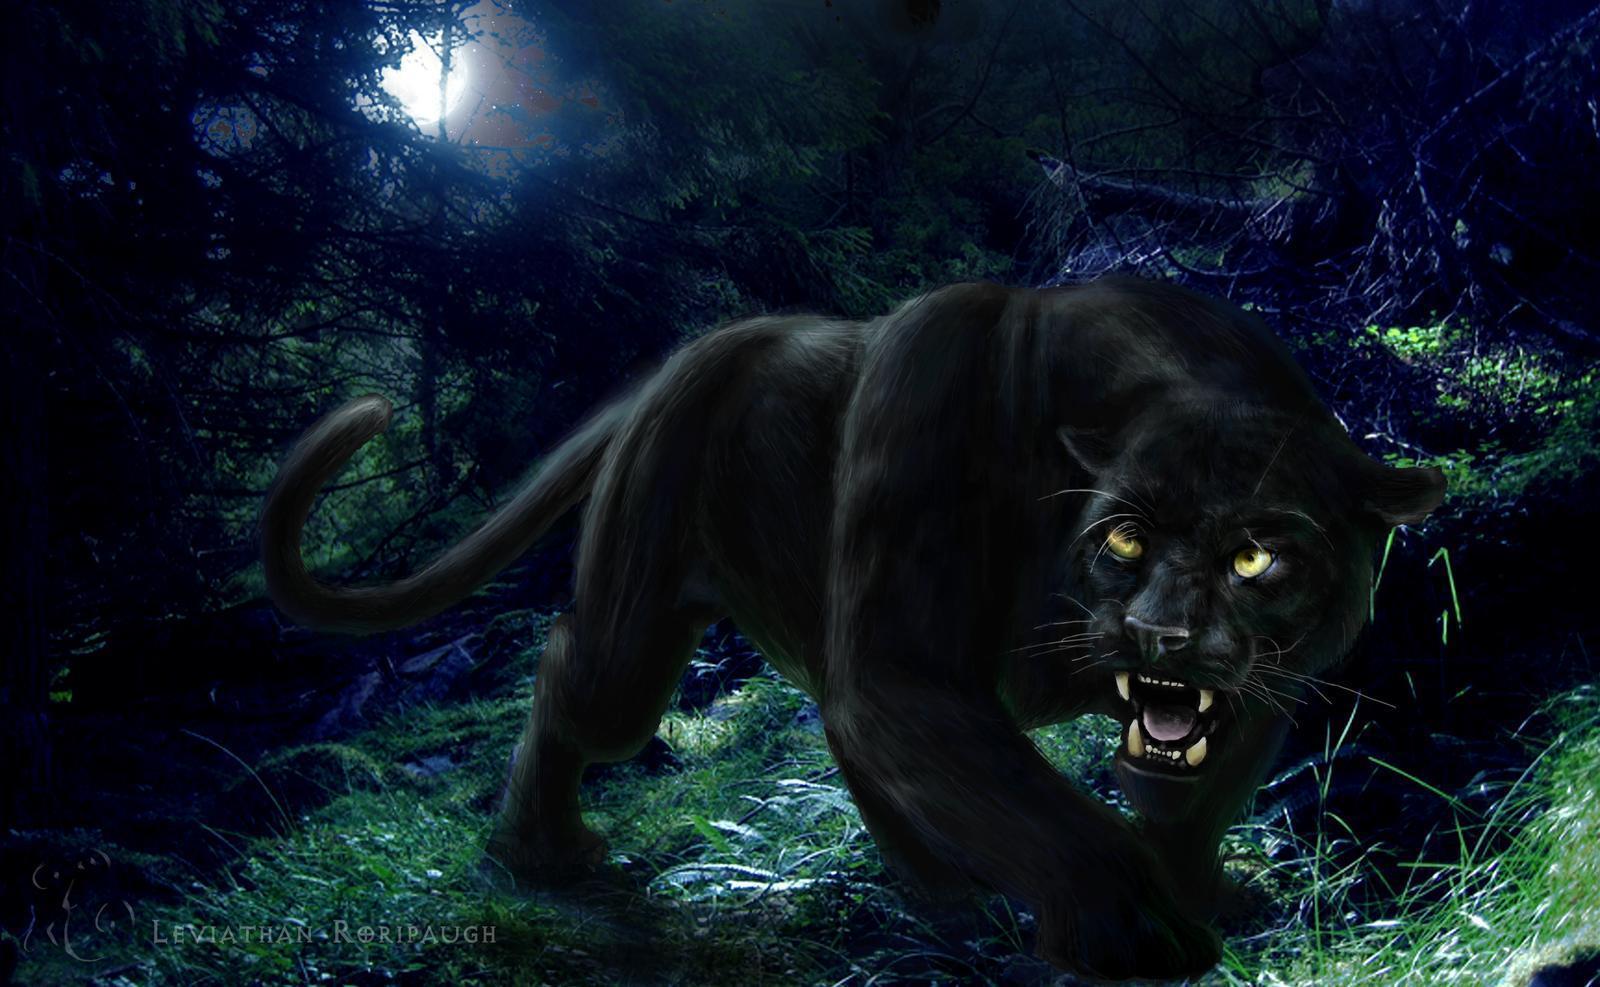 Wallpaper For > Black Panther Wallpaper With Blue Eyes